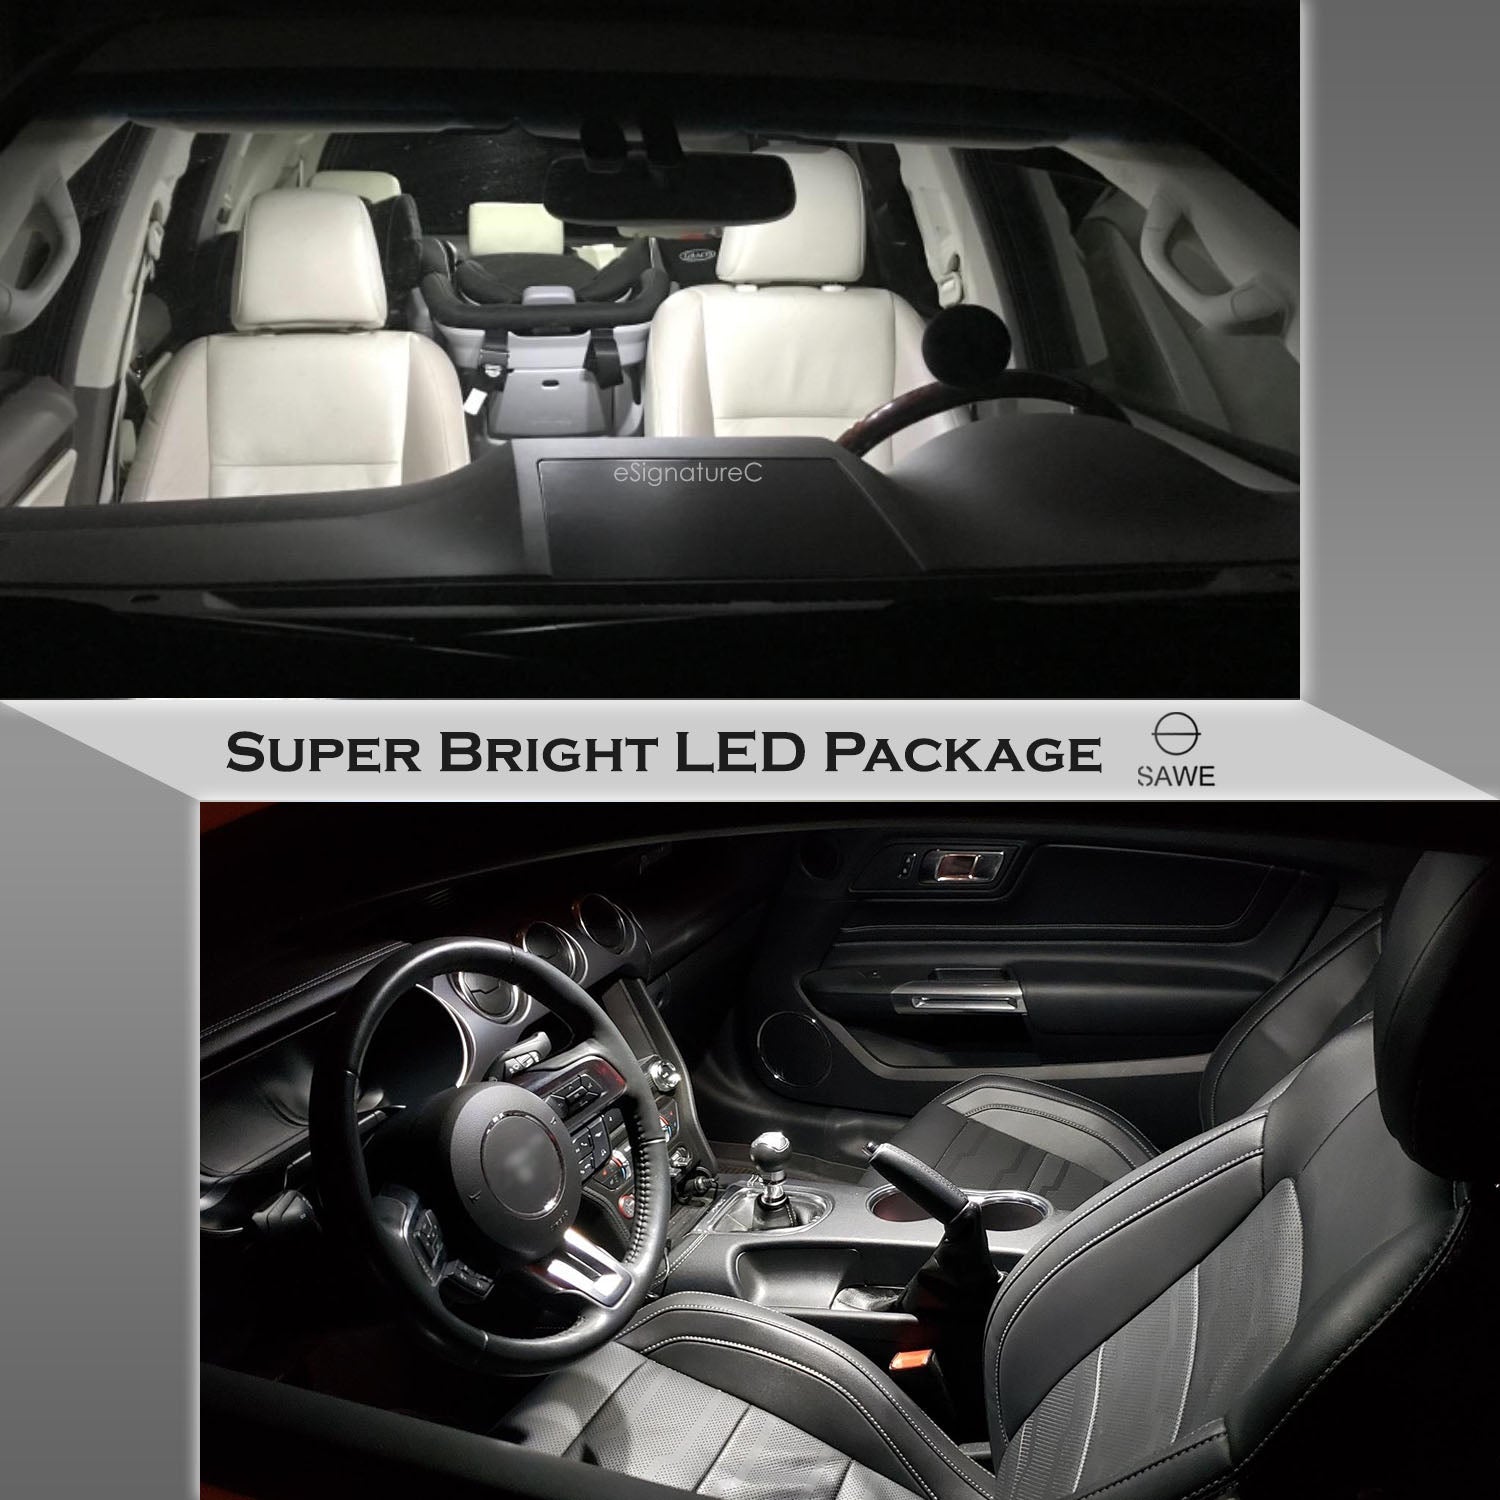 For Toyota Venza Interior LED Lights - Dome & Map Lights Package Kit for 2009 - 2016 - White